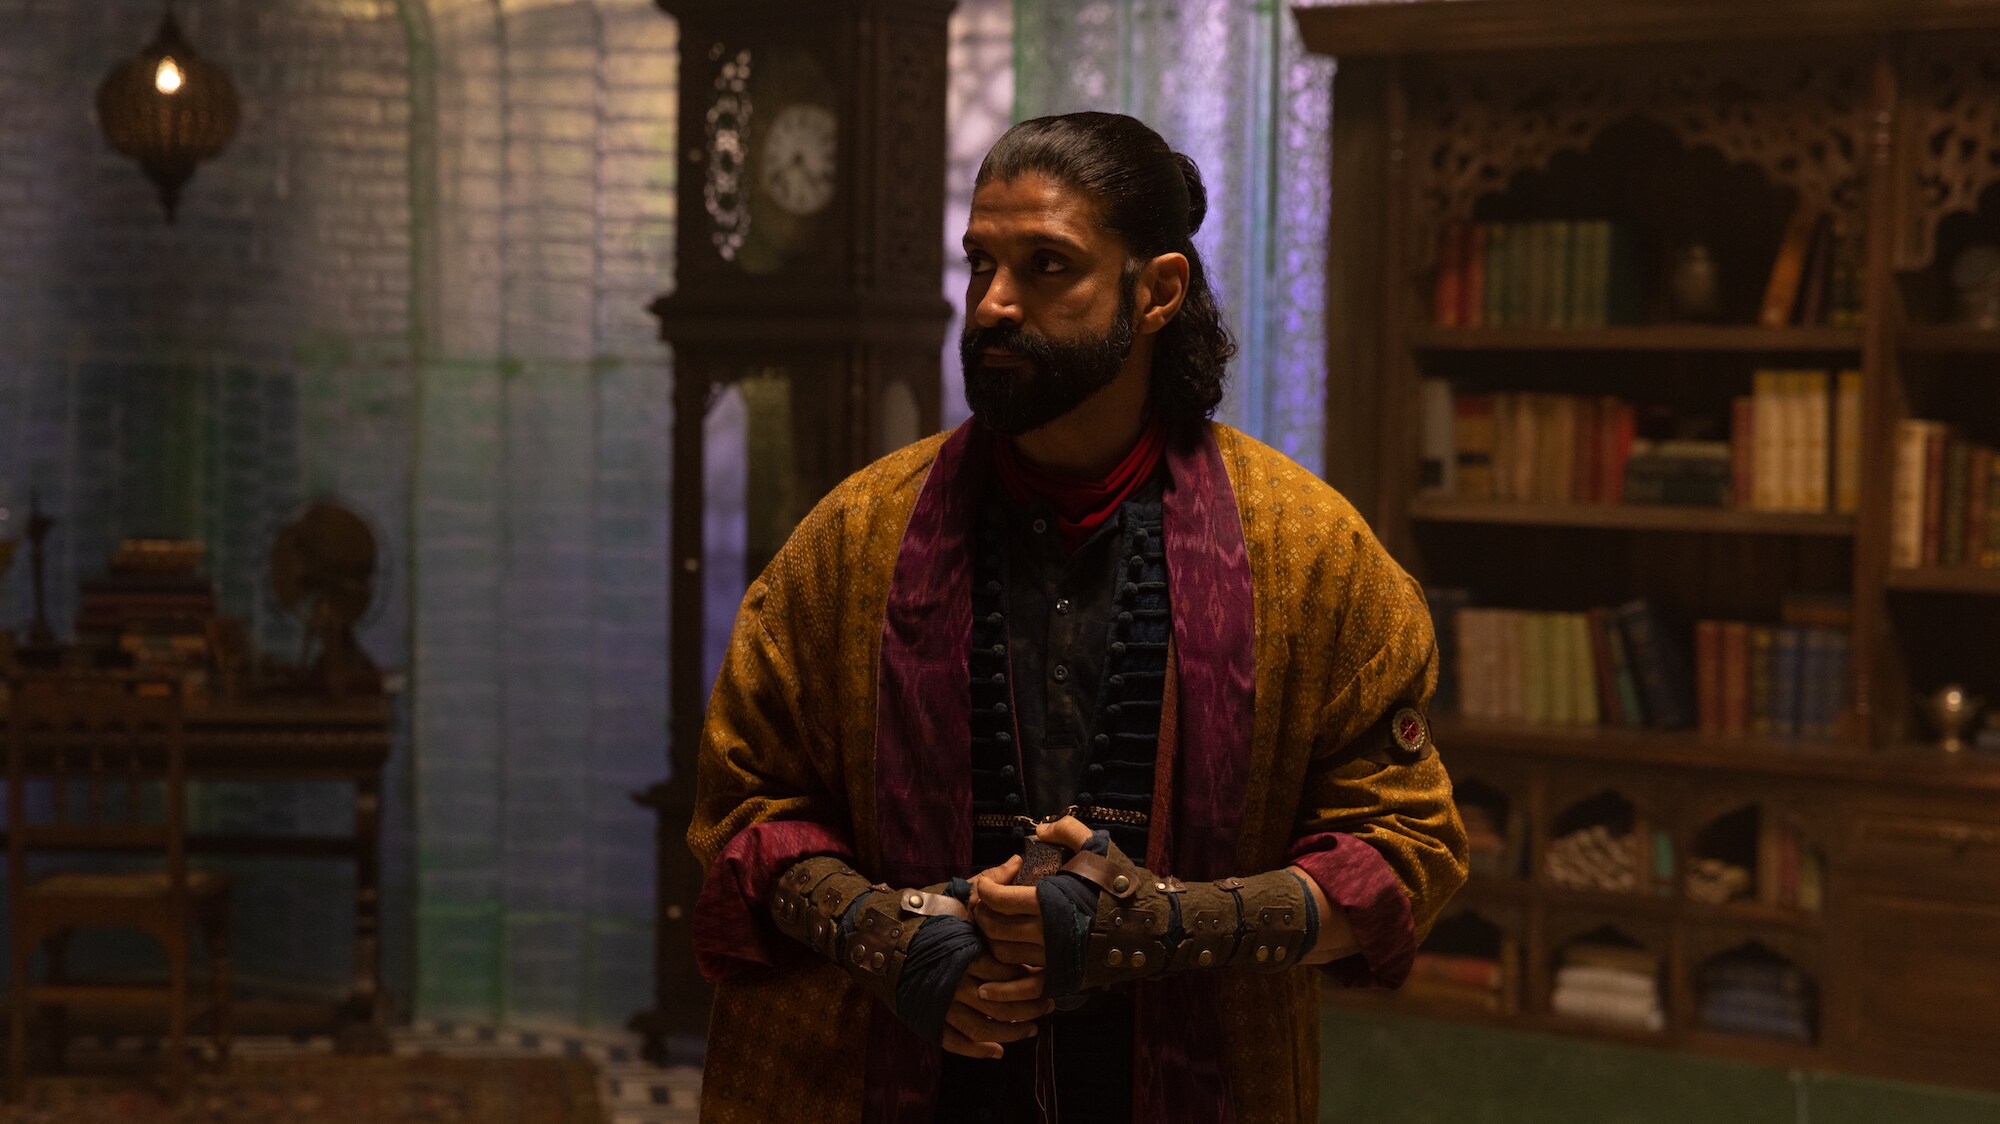 Farhan Akhtar as Waleed in Marvel Studios' MS. MARVEL, exclusively on Disney+. Photo by Patrick Brown. ©Marvel Studios 2022. All Rights Reserved.